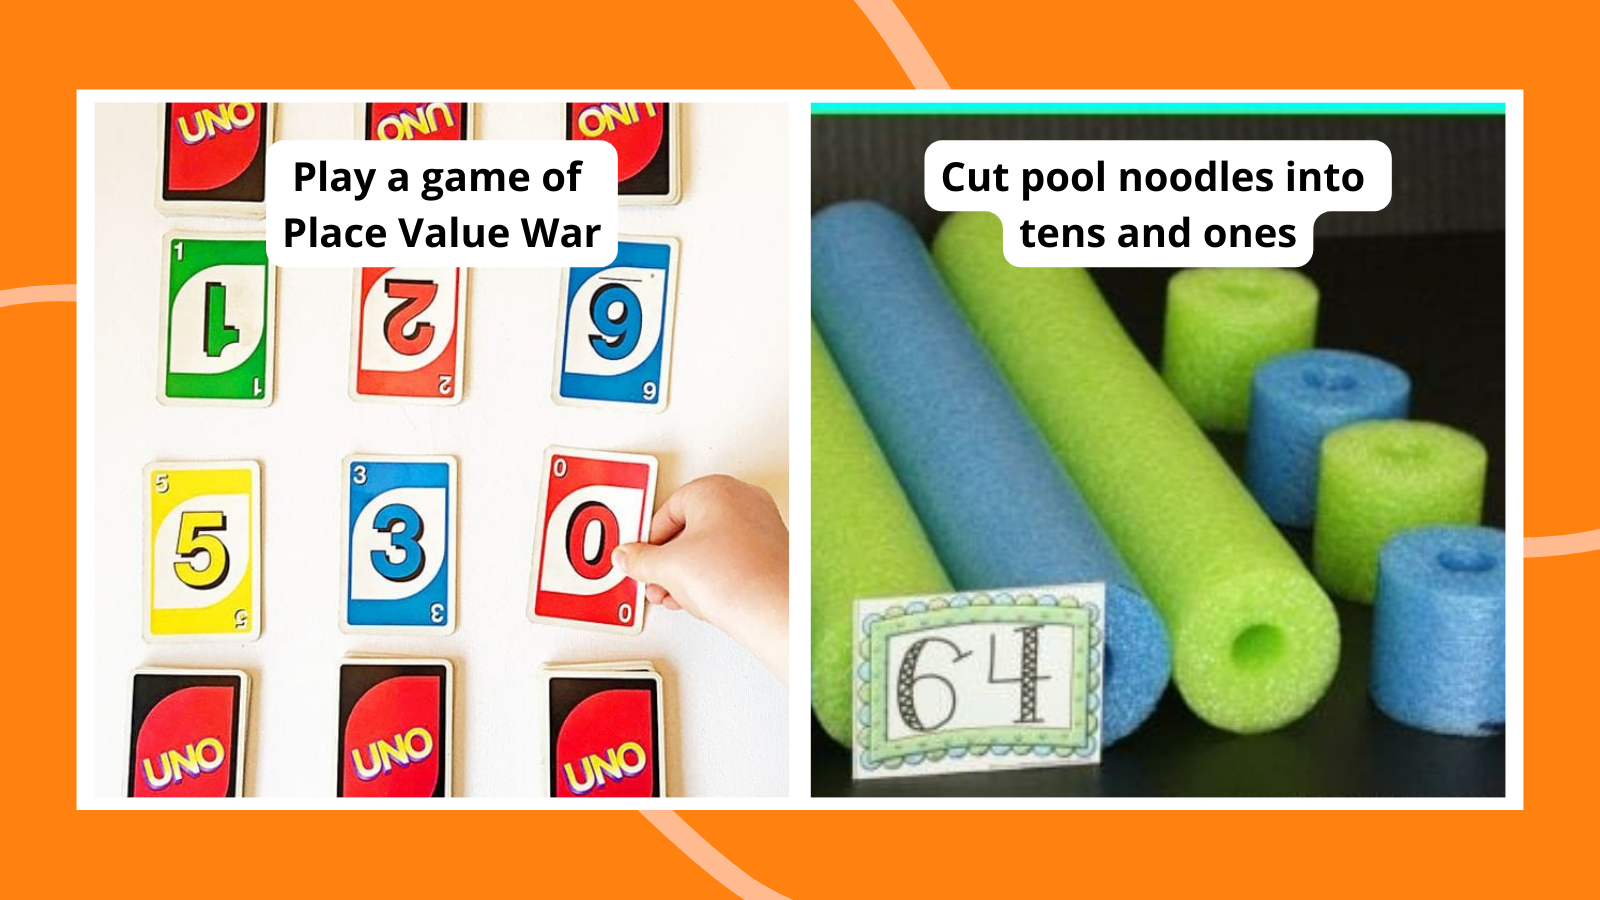 Examples of place value games and activities including Place Value War and cutting pool noodles into tens and ones.